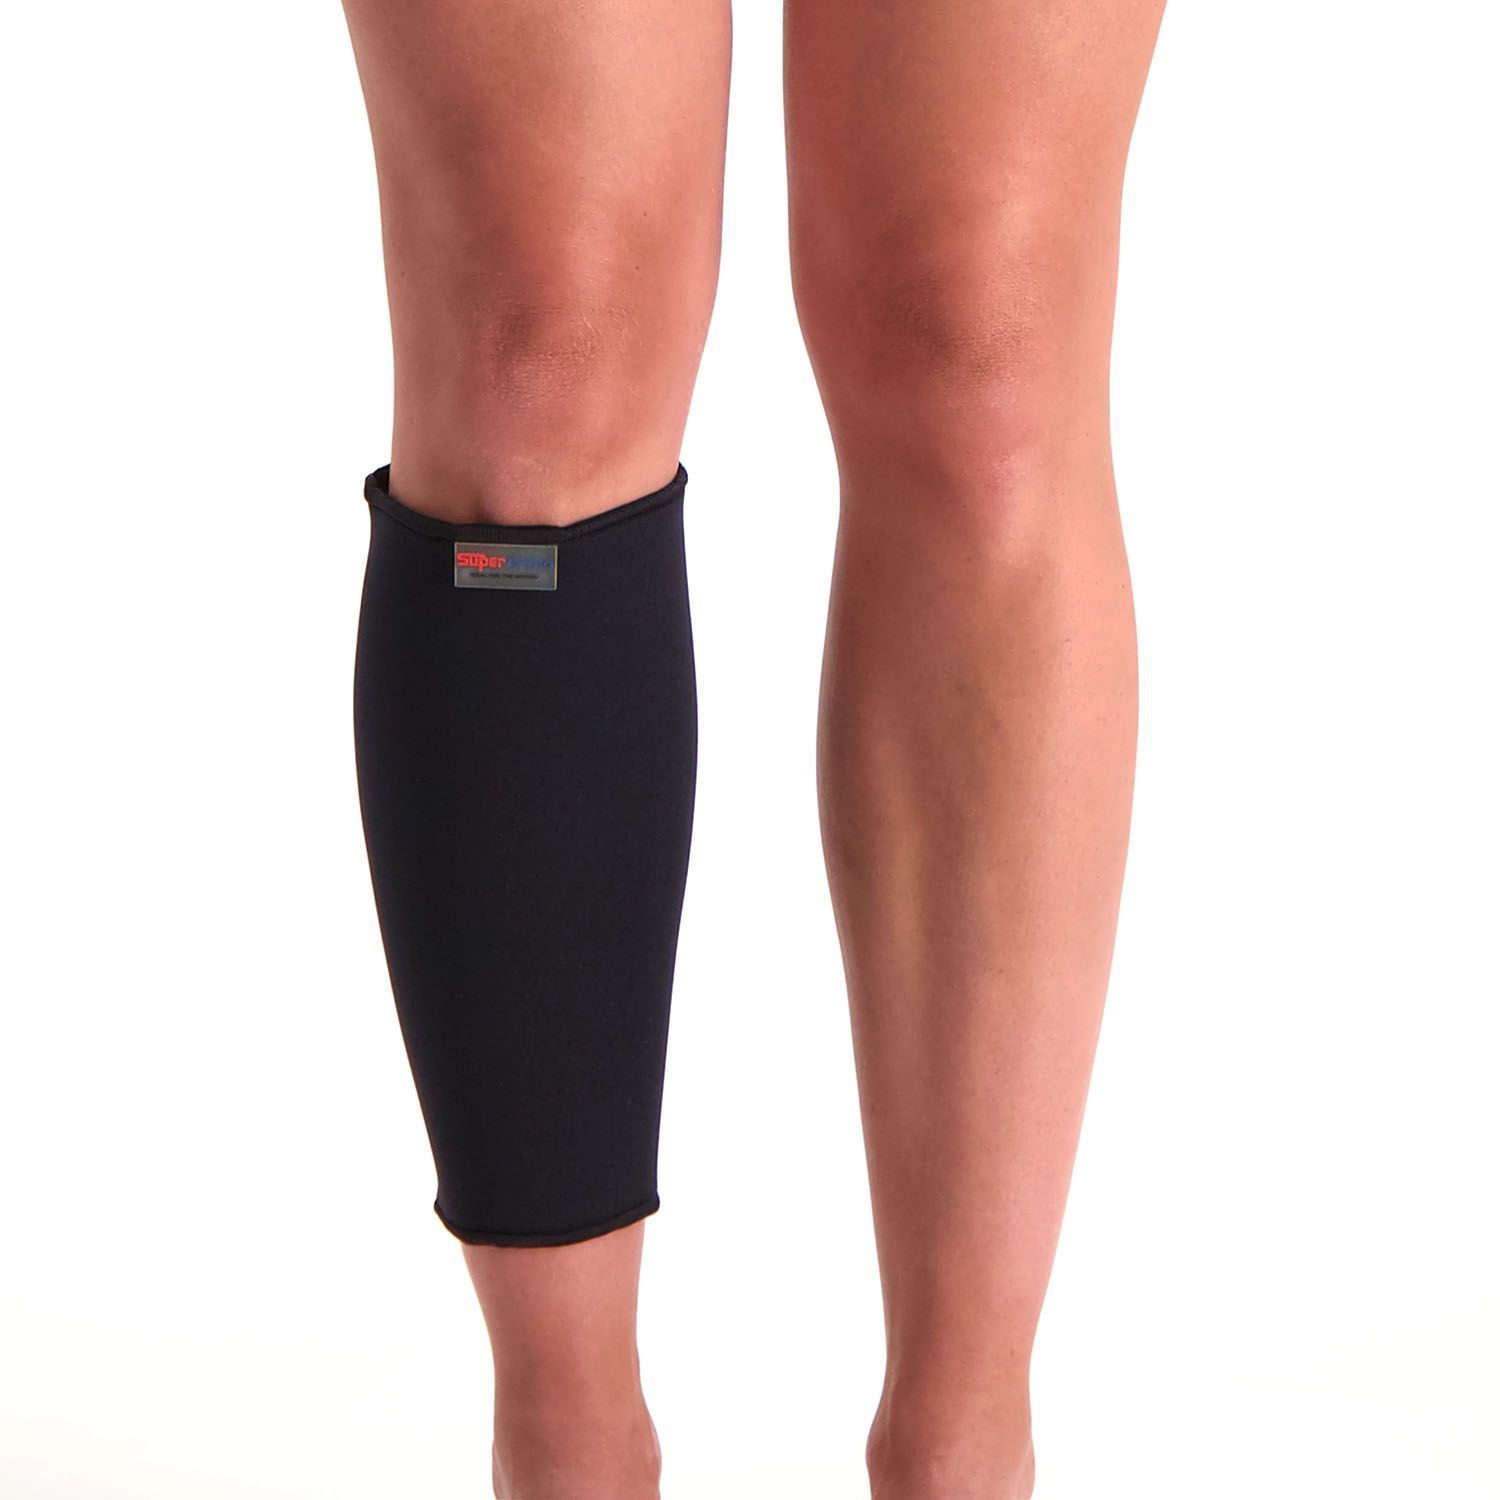 super ortho calf support black front view